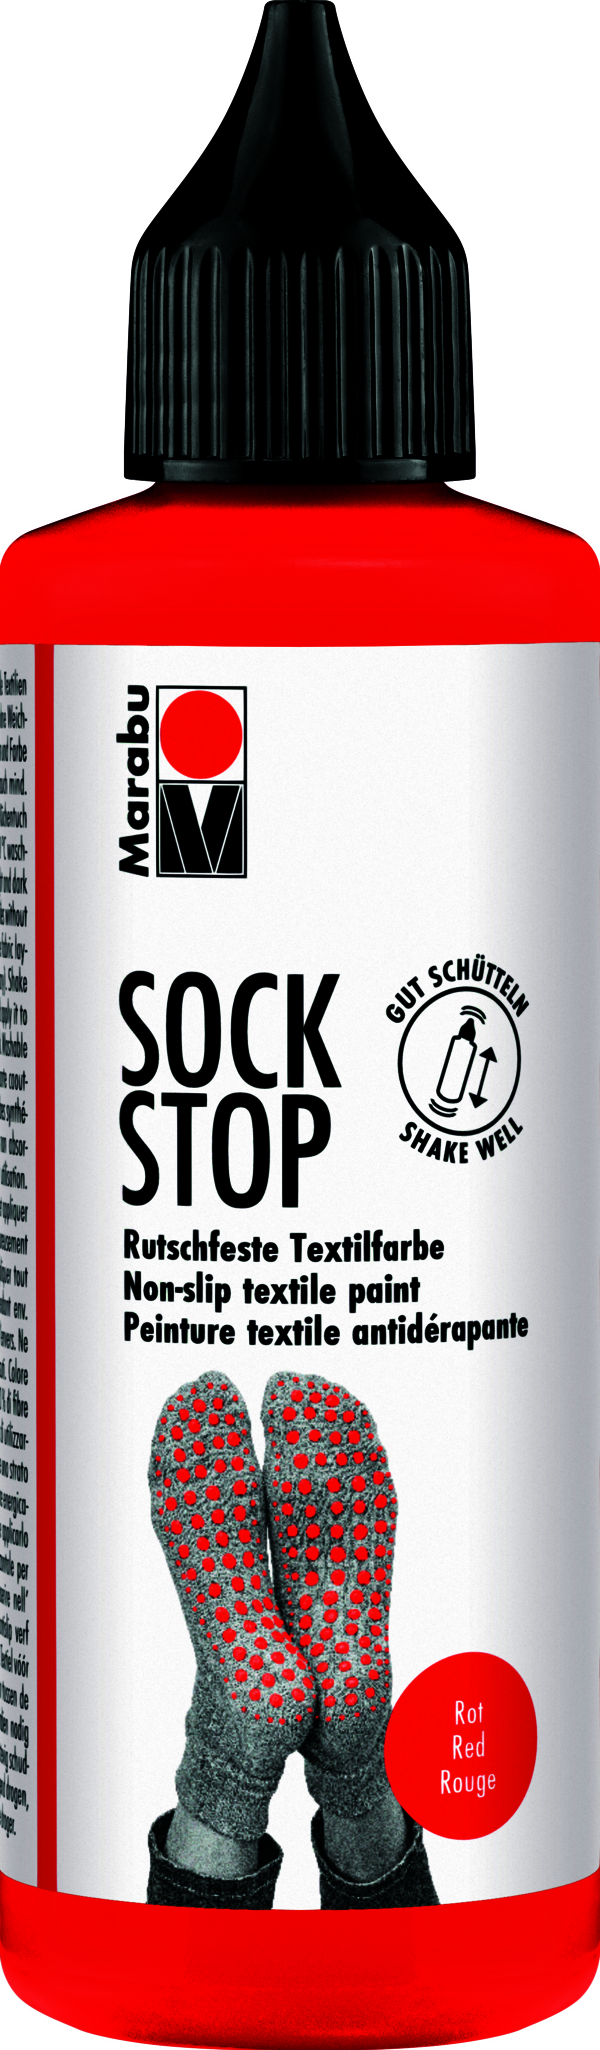 The Sock Stop